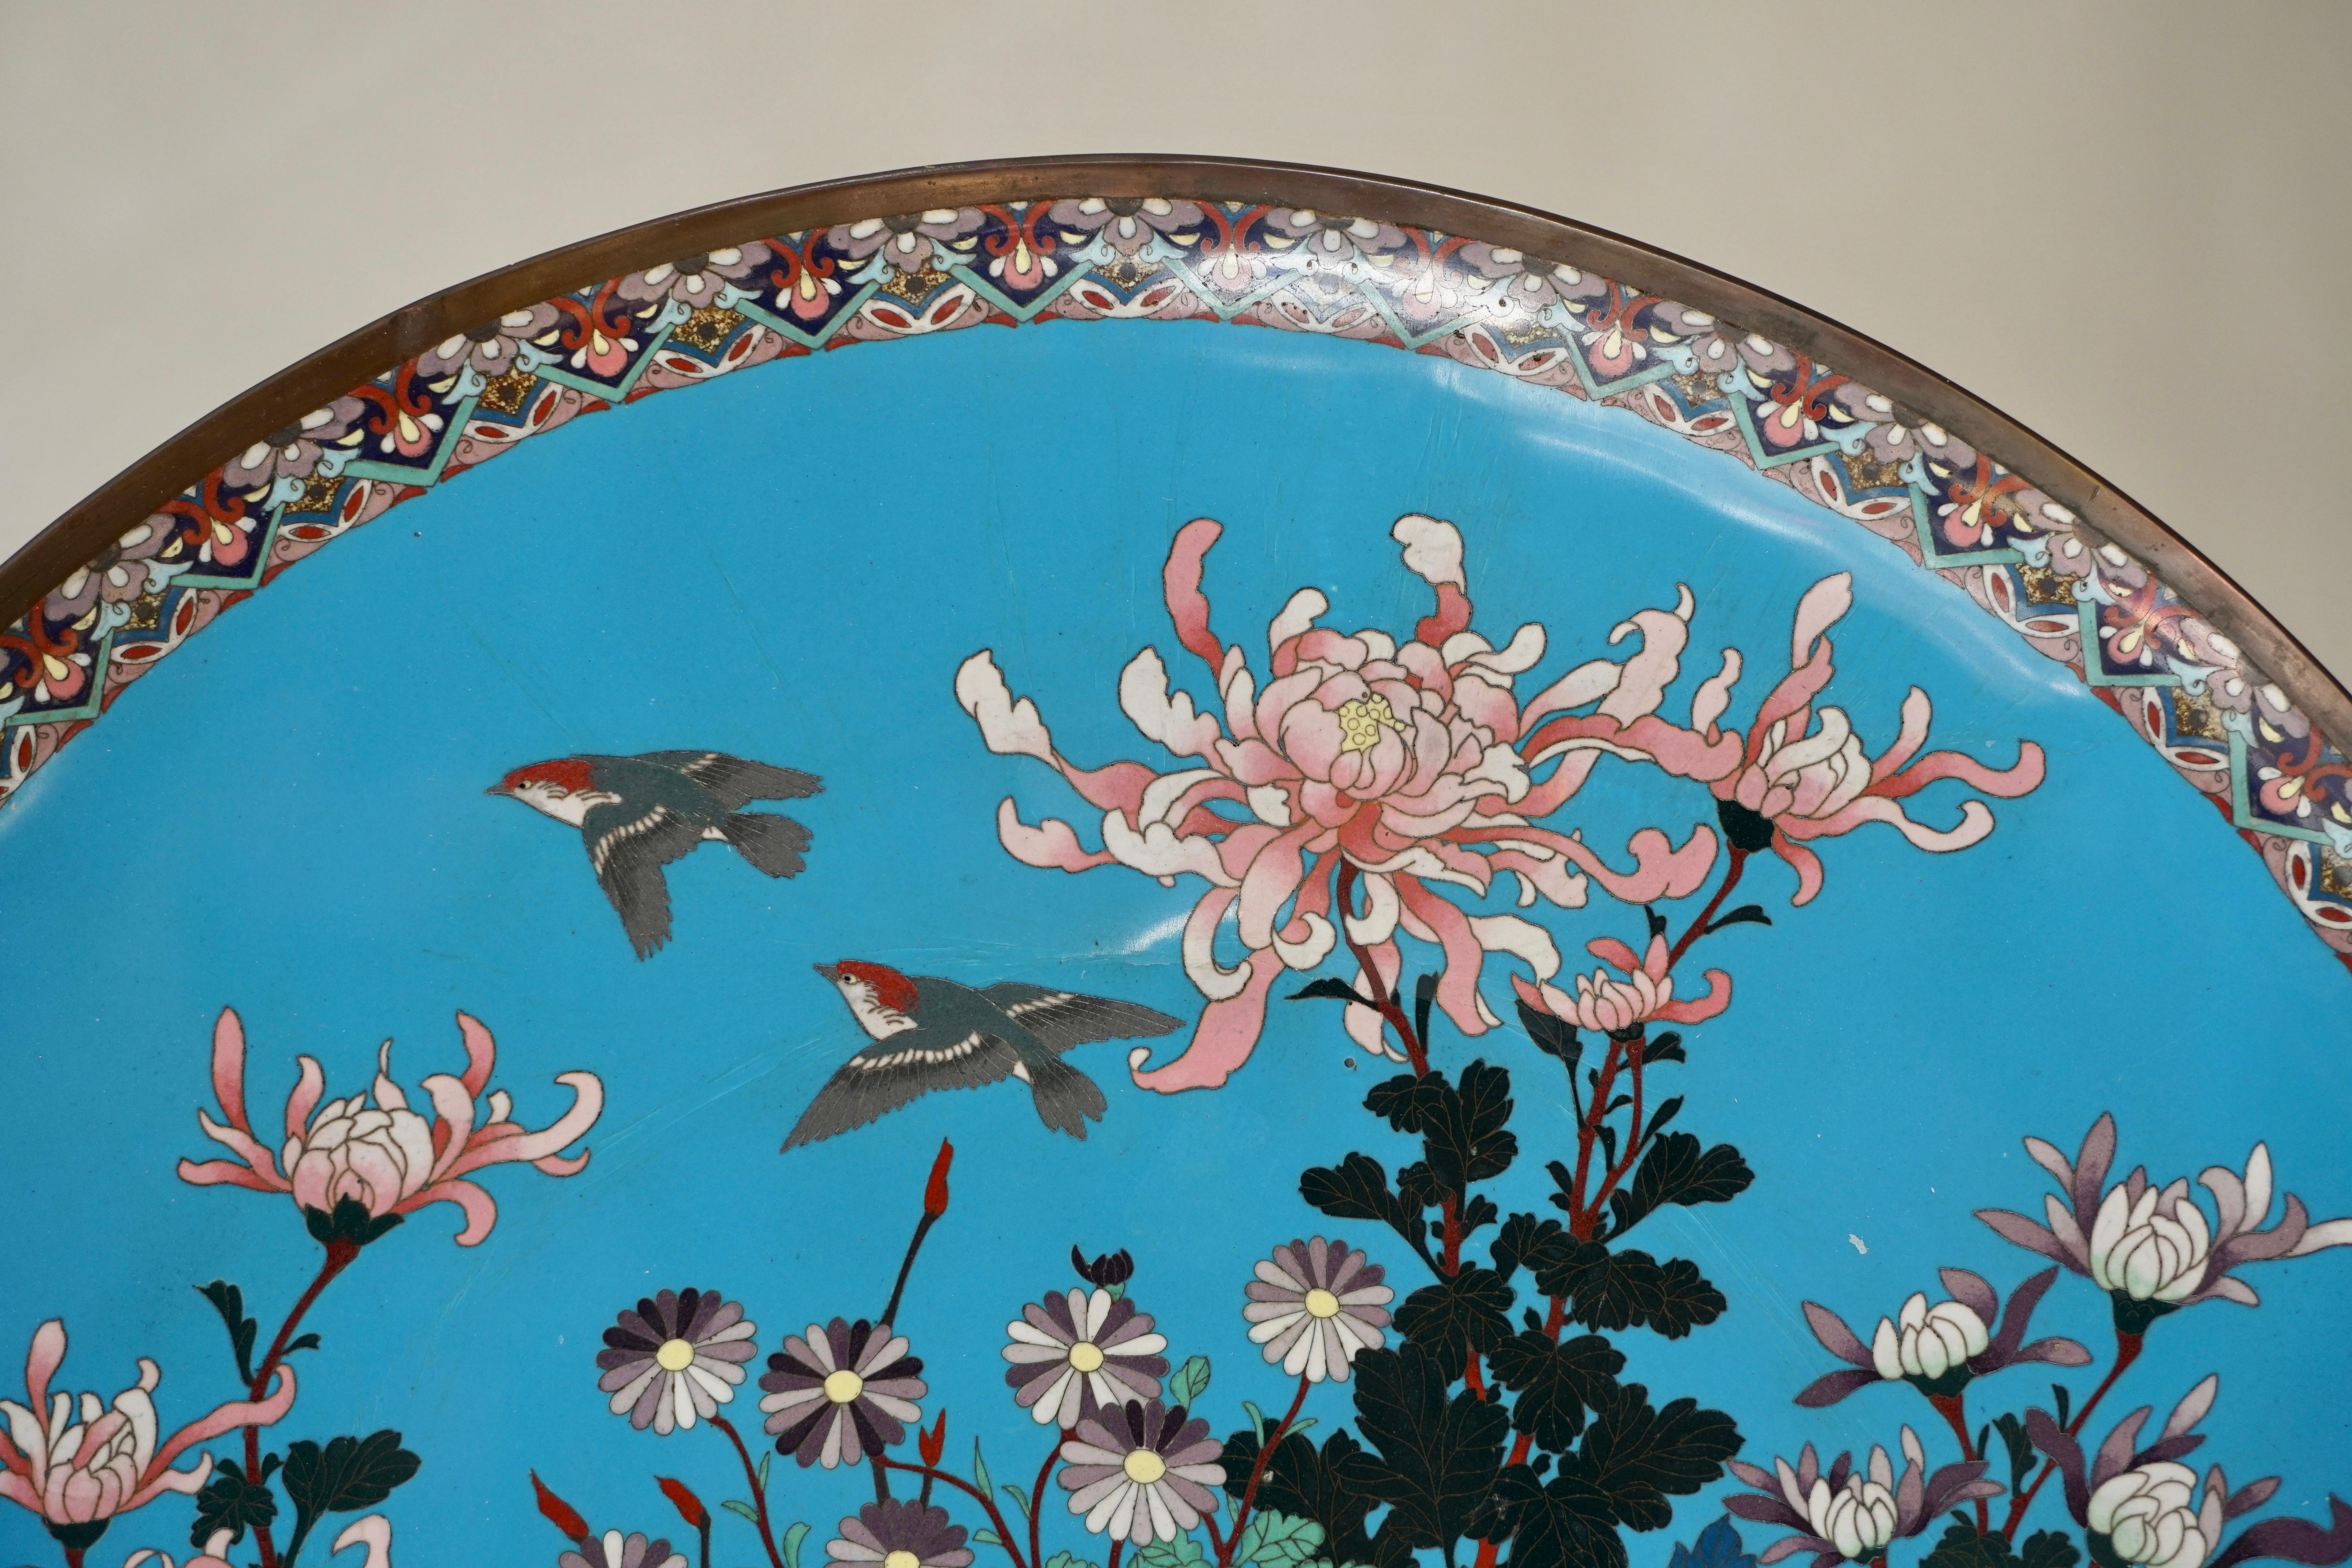 Hollywood Regency Quality Antique Japanese Cloisonné Plate or Wall Art Decoration